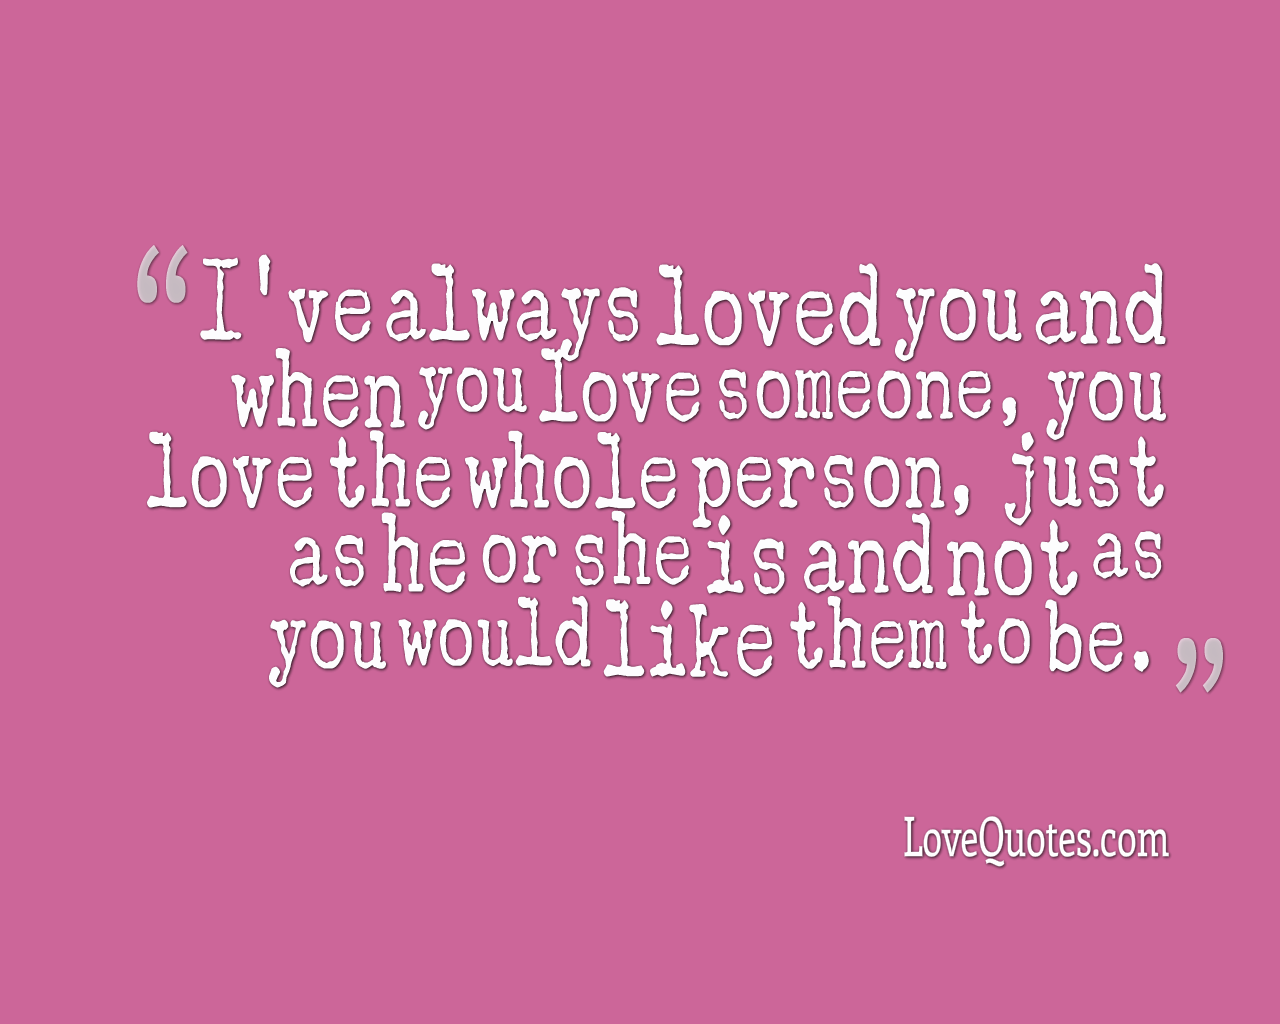 Ive Always Loved You - Love Quotes